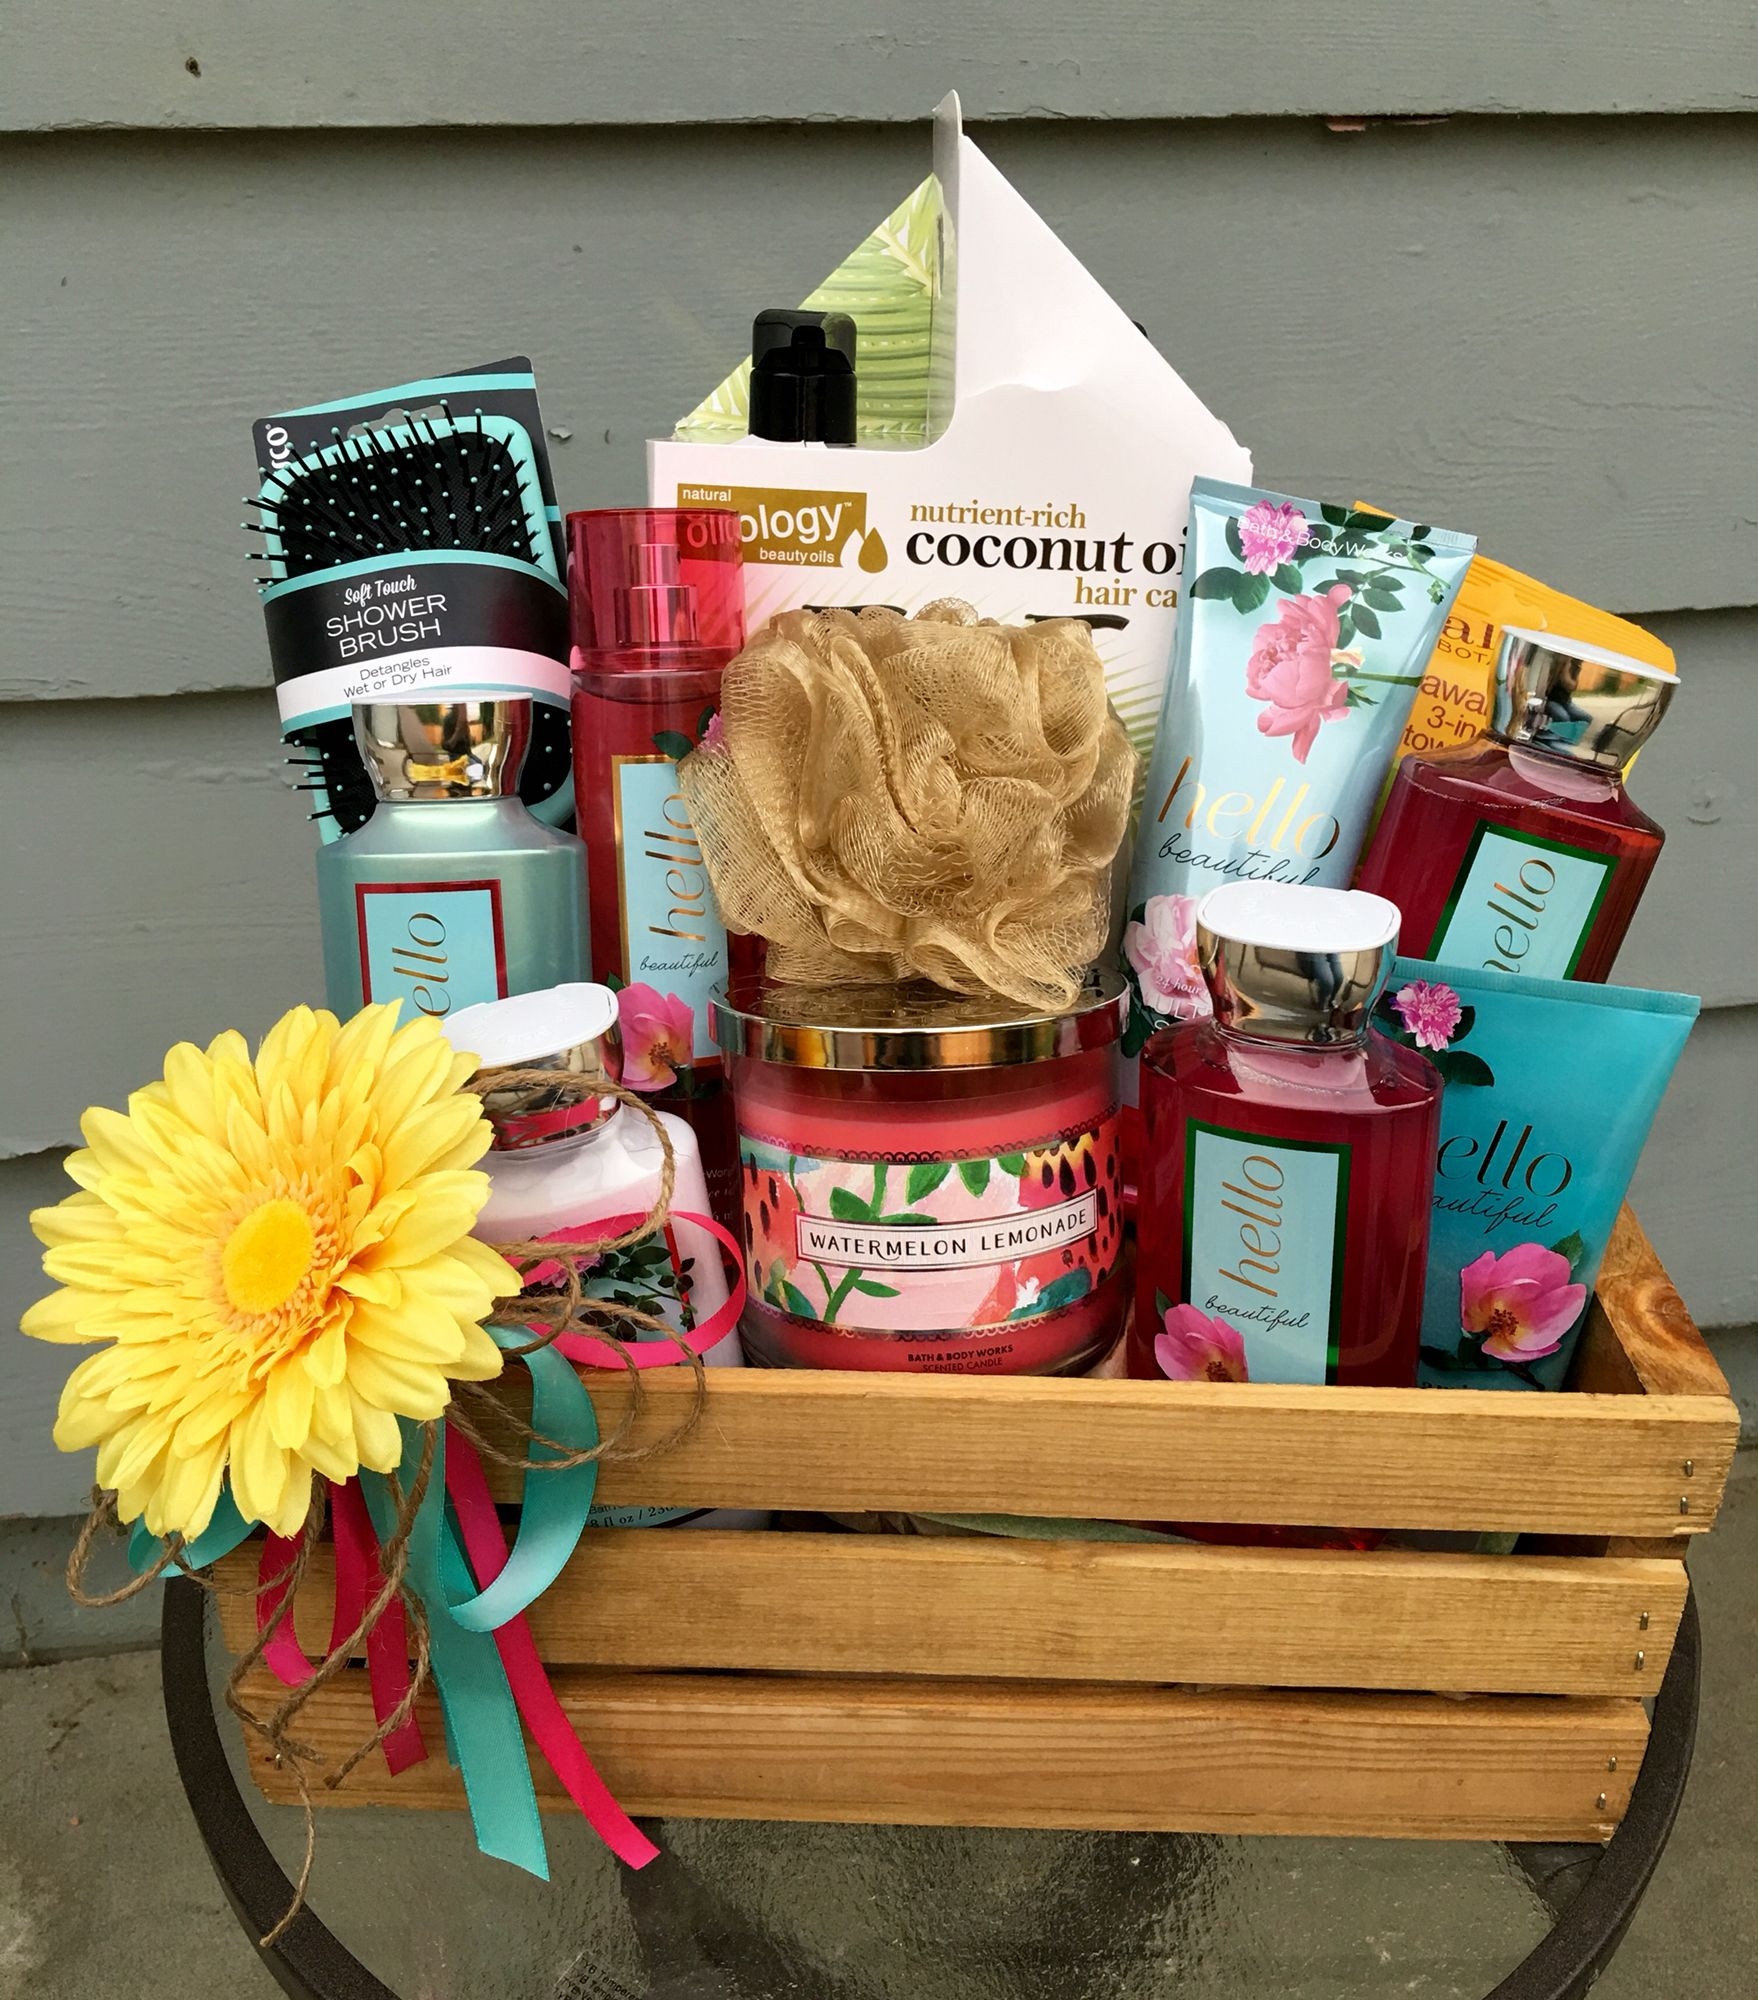 Bridal Shower Gift Basket Ideas For Guests
 Bridal Shower Prizes That Will Adore Your Guests